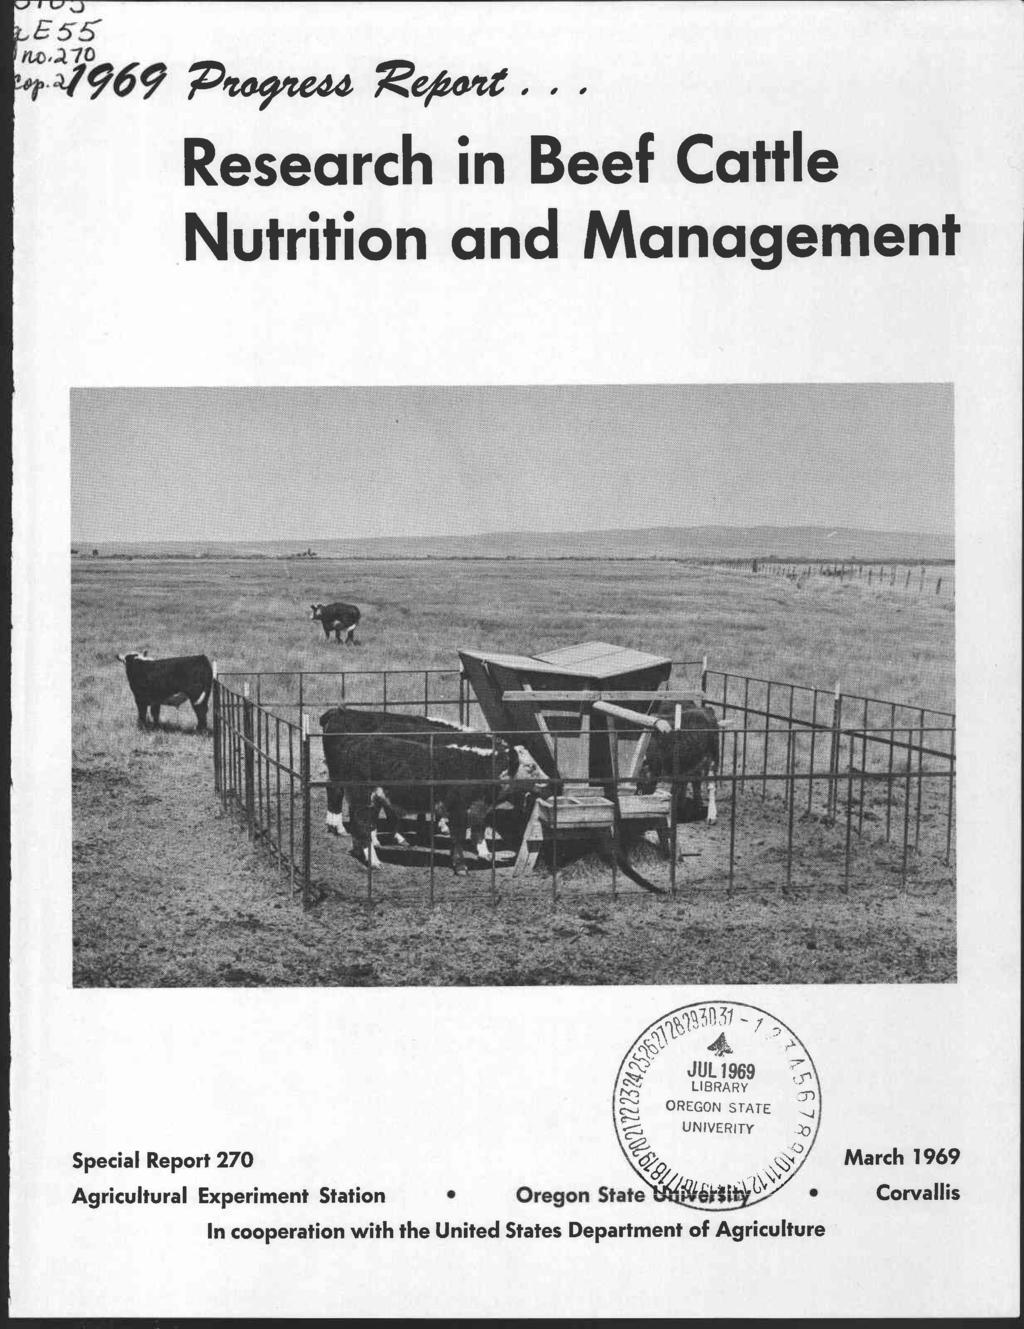 71969. p Research in Beef Cattle Nutrition and Management,,,r,-,q3-1 ``' ' (. ''\ ' JUL (%4 Z ct4.